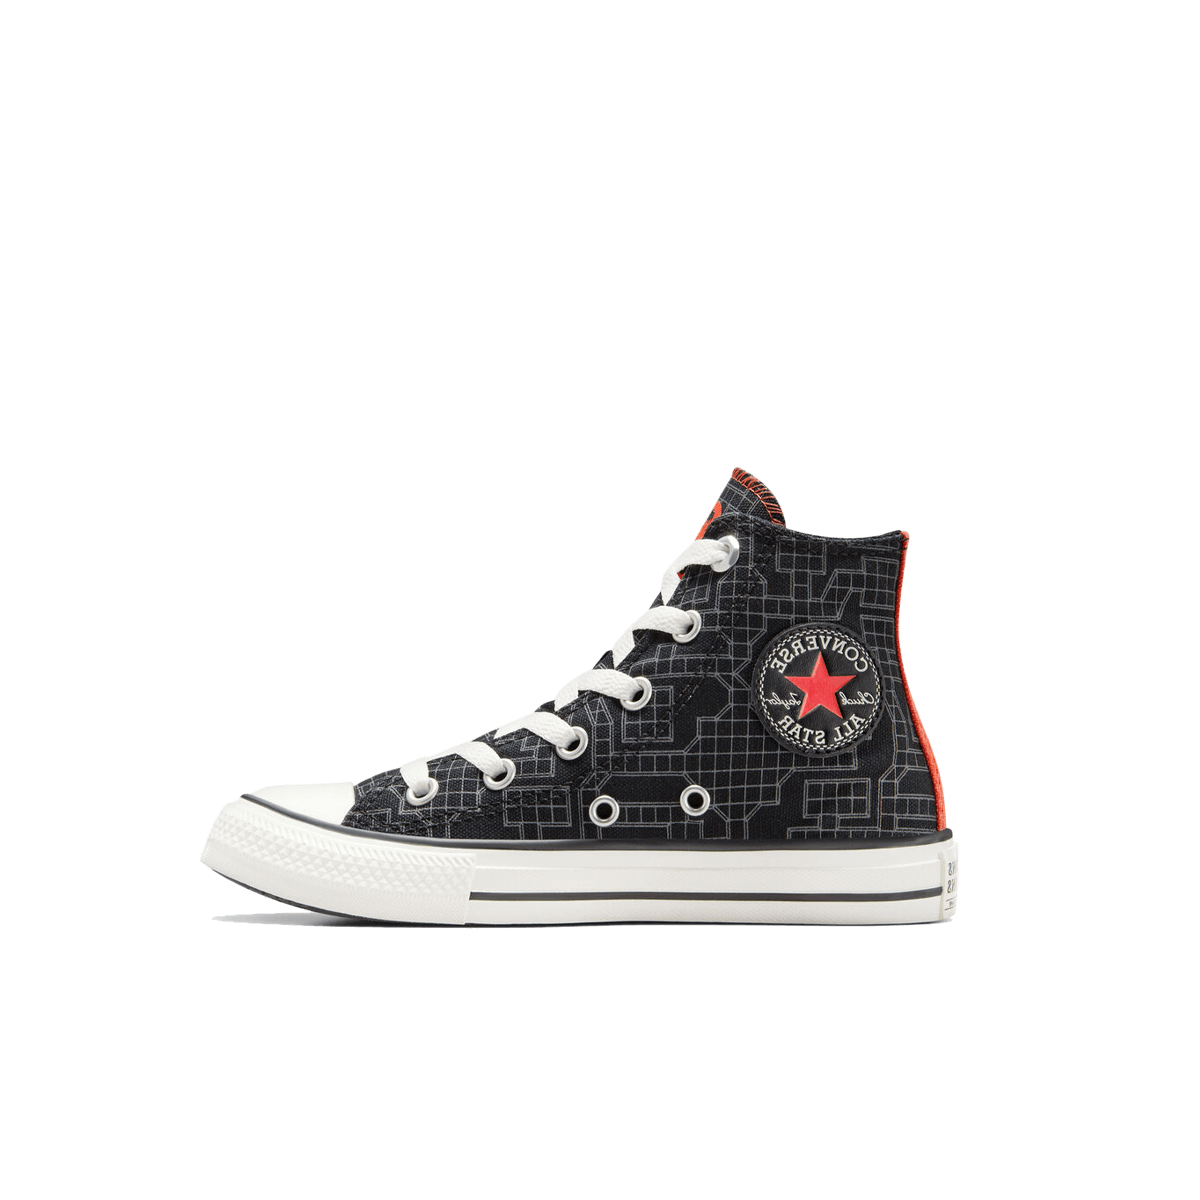 Dungeons & Dragons x Converse Chuck Taylor All Star PS 'D20 Dice' A09887C